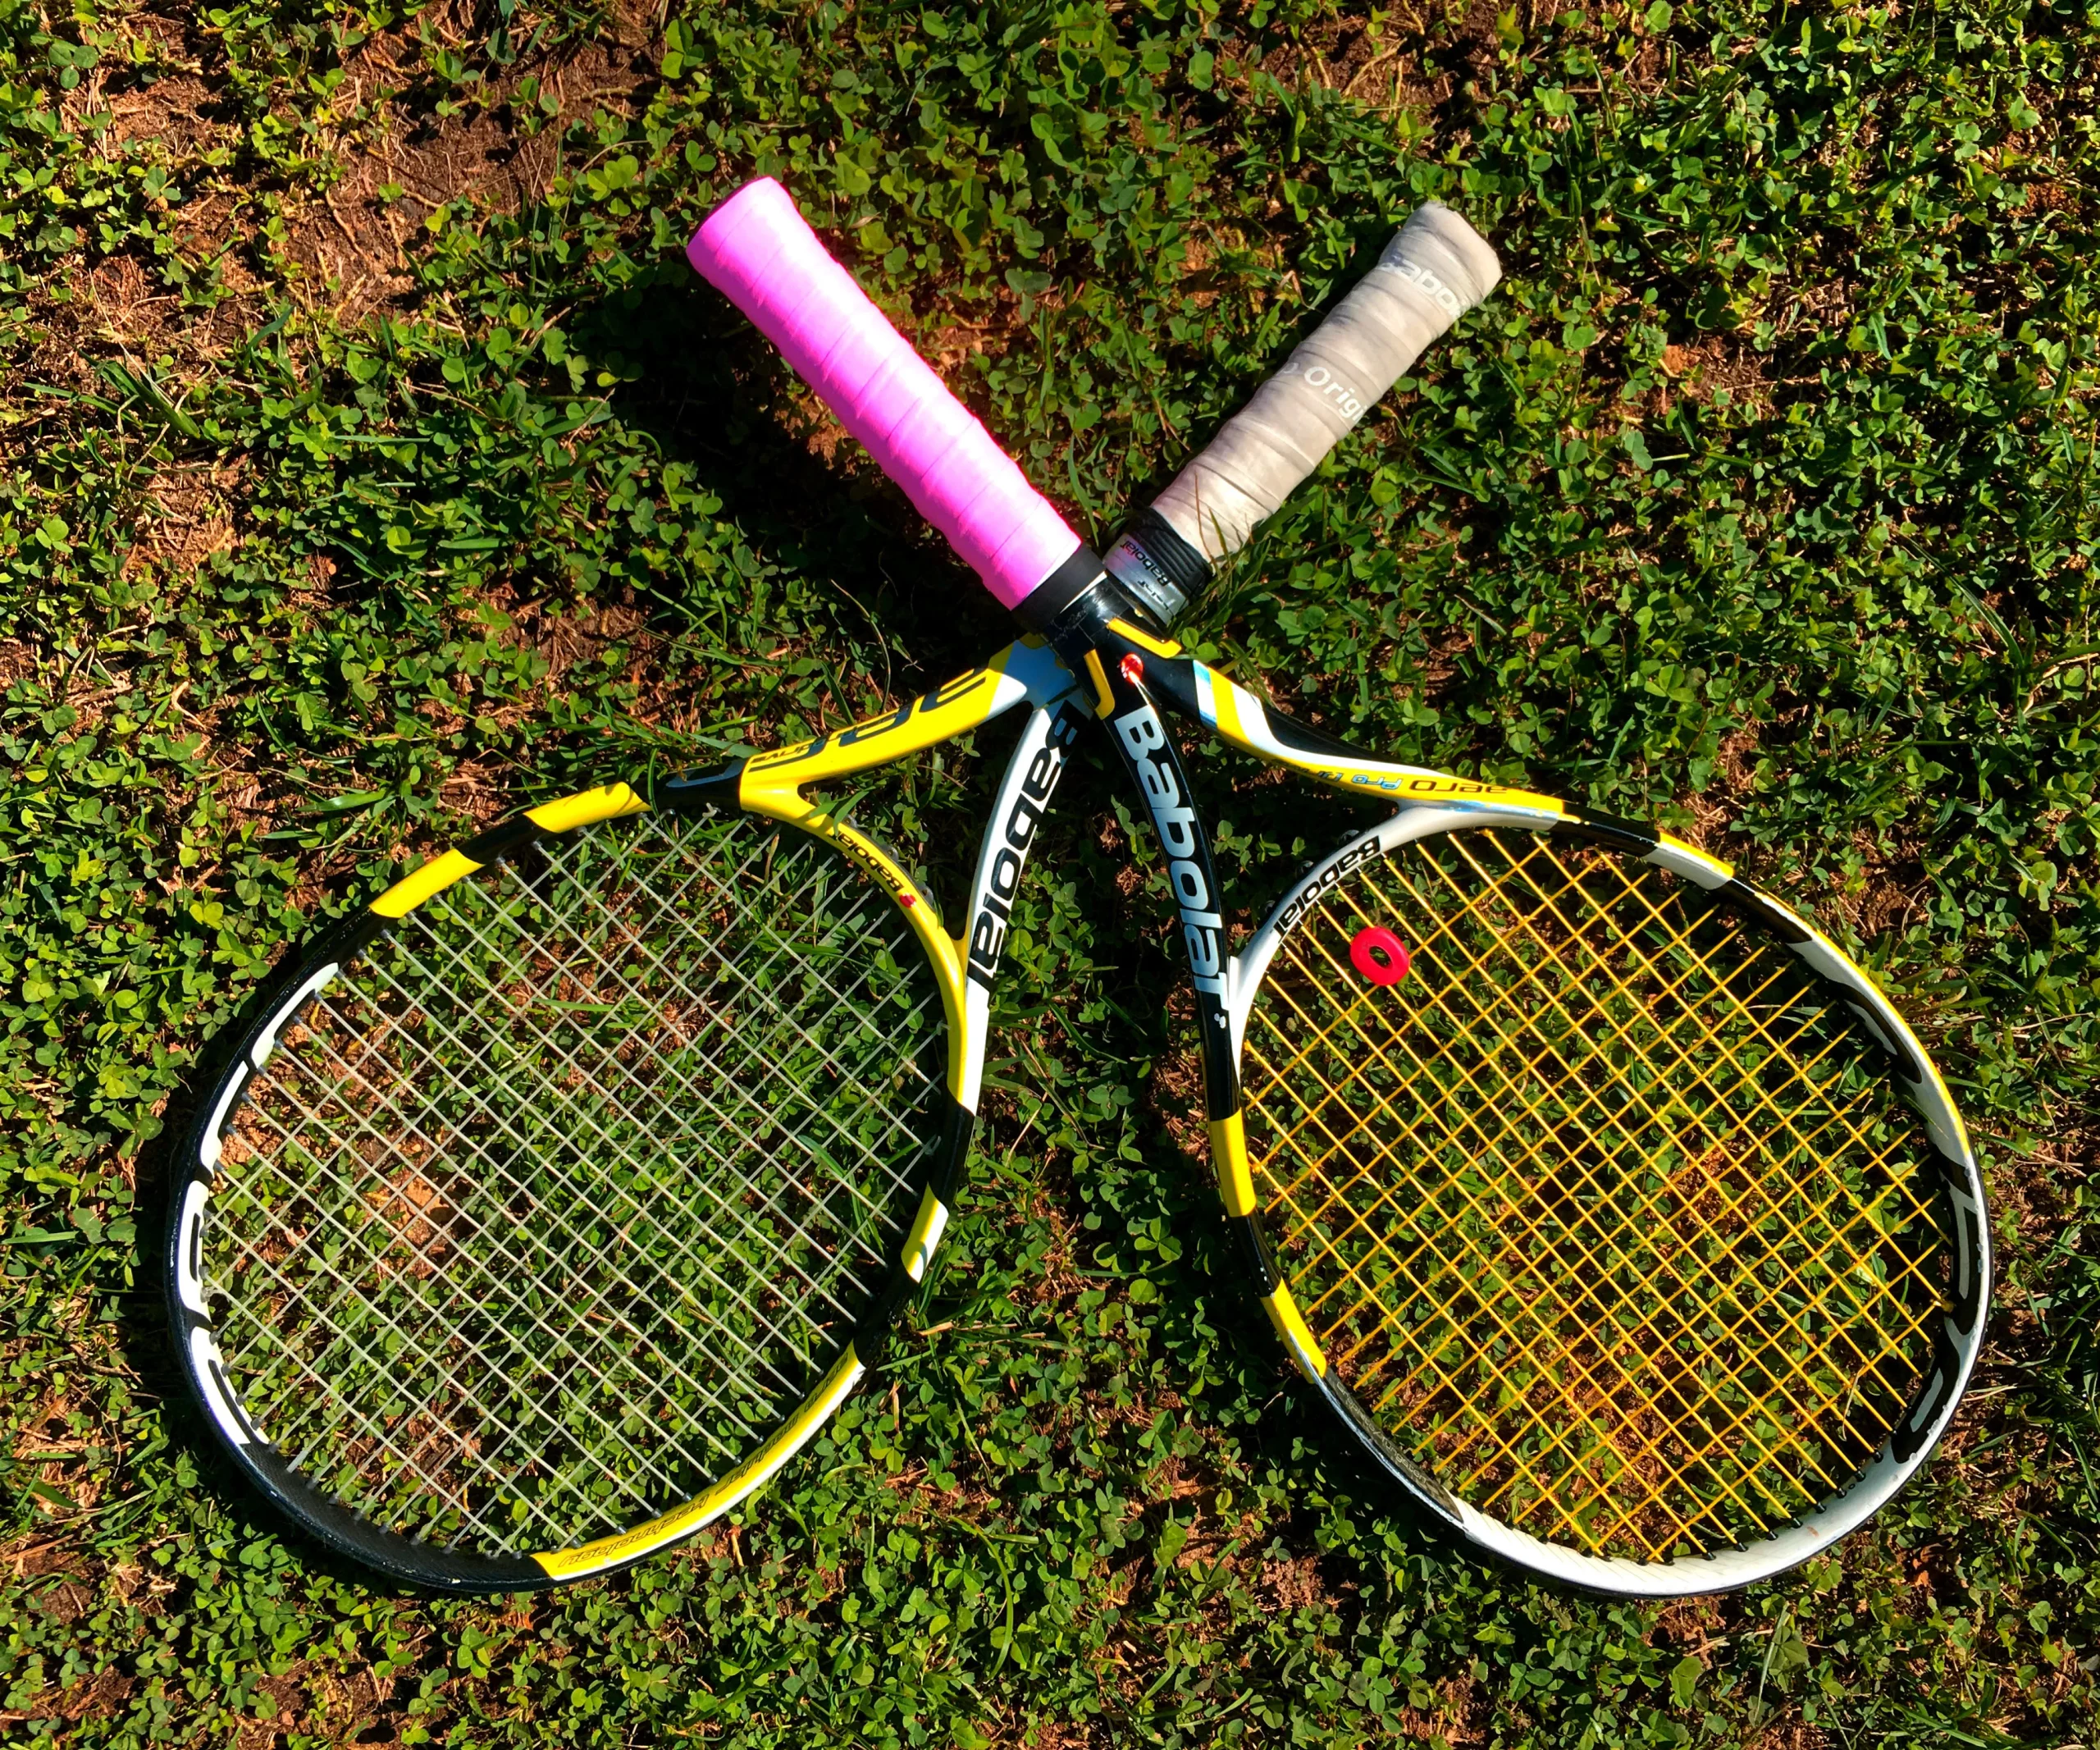 Unleash Your Potential with Racora Tennis racquet Grip’s High-Performance Tennis Gear